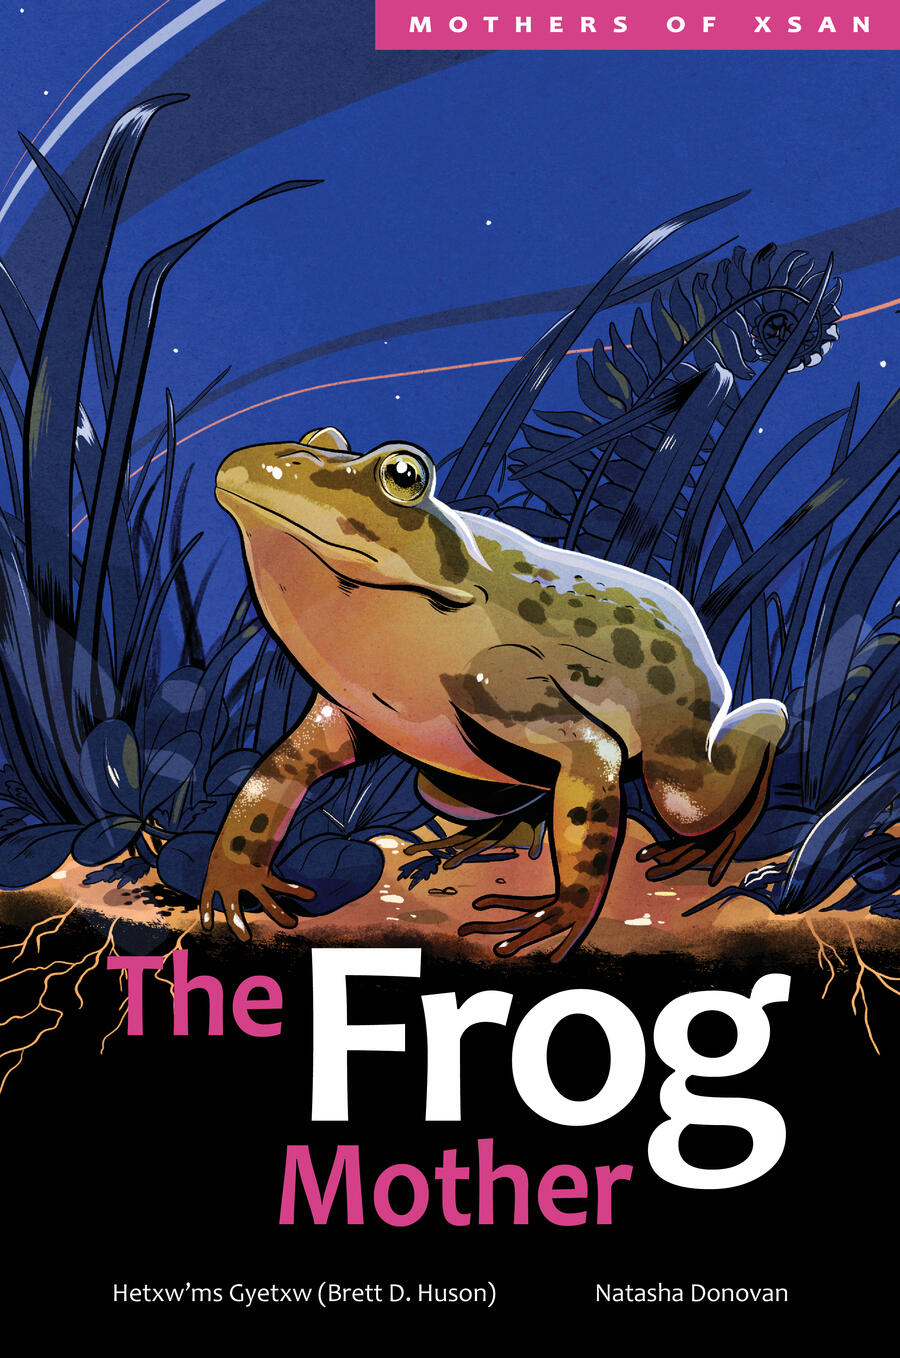 The Frog Mother  Portage & Main Press/HighWater Press